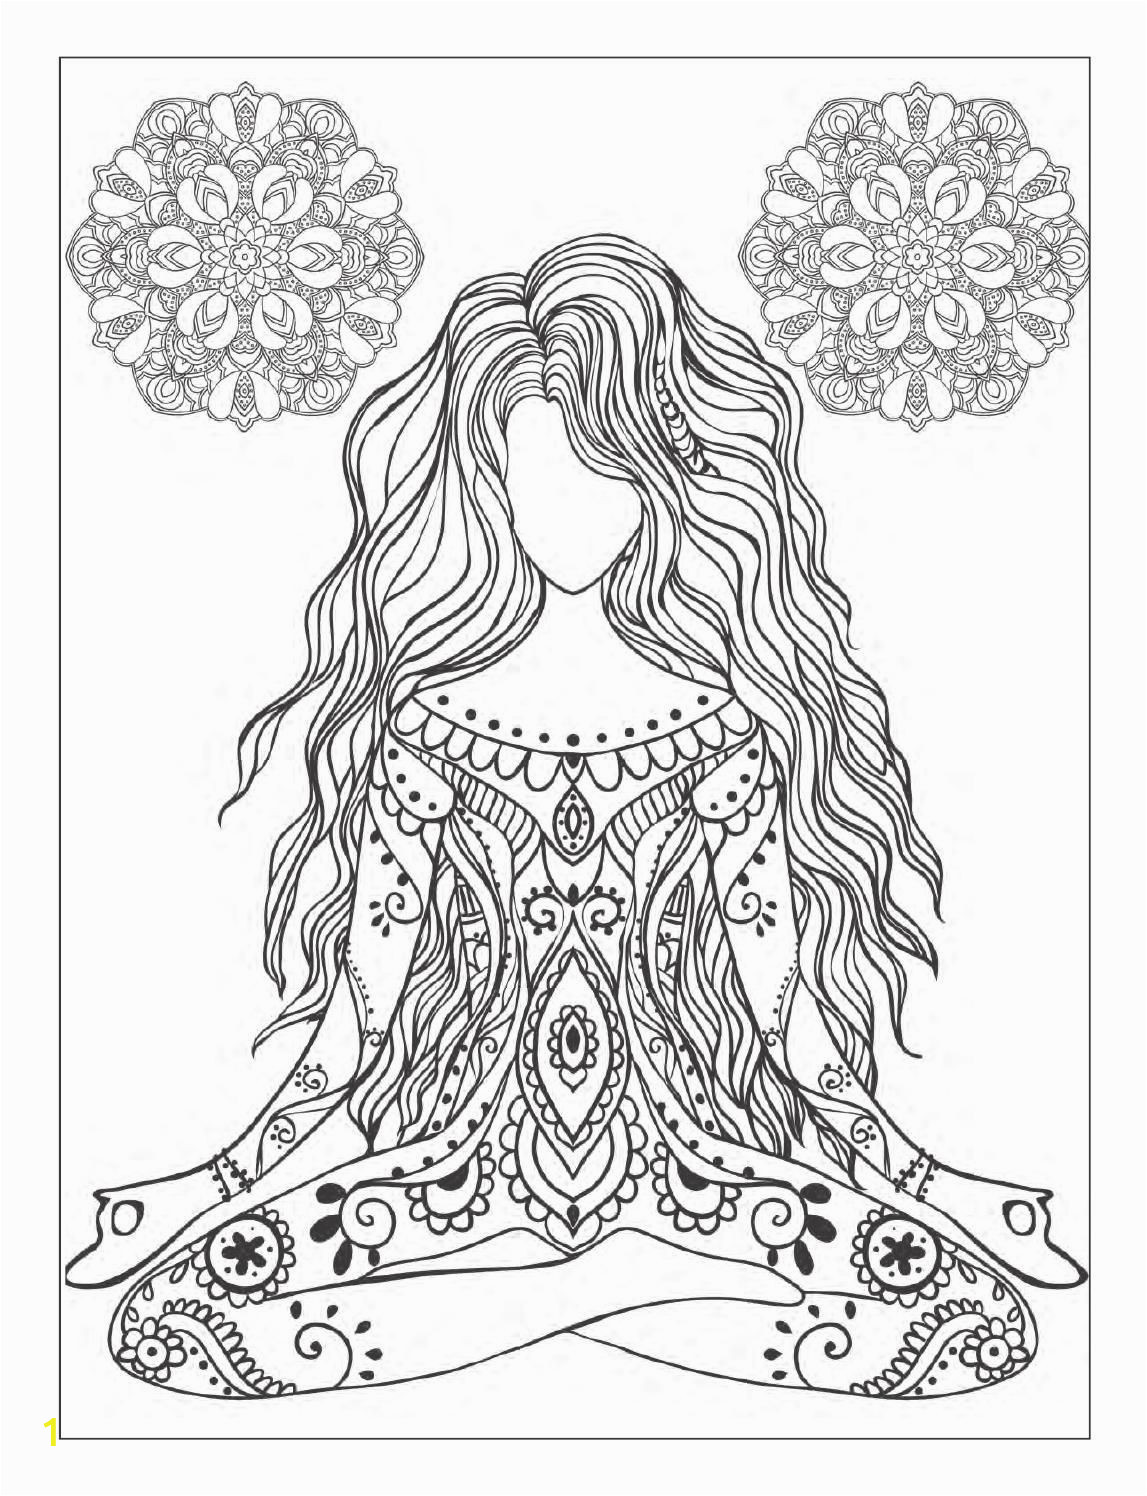 Mindfulness Coloring Pages Mediation